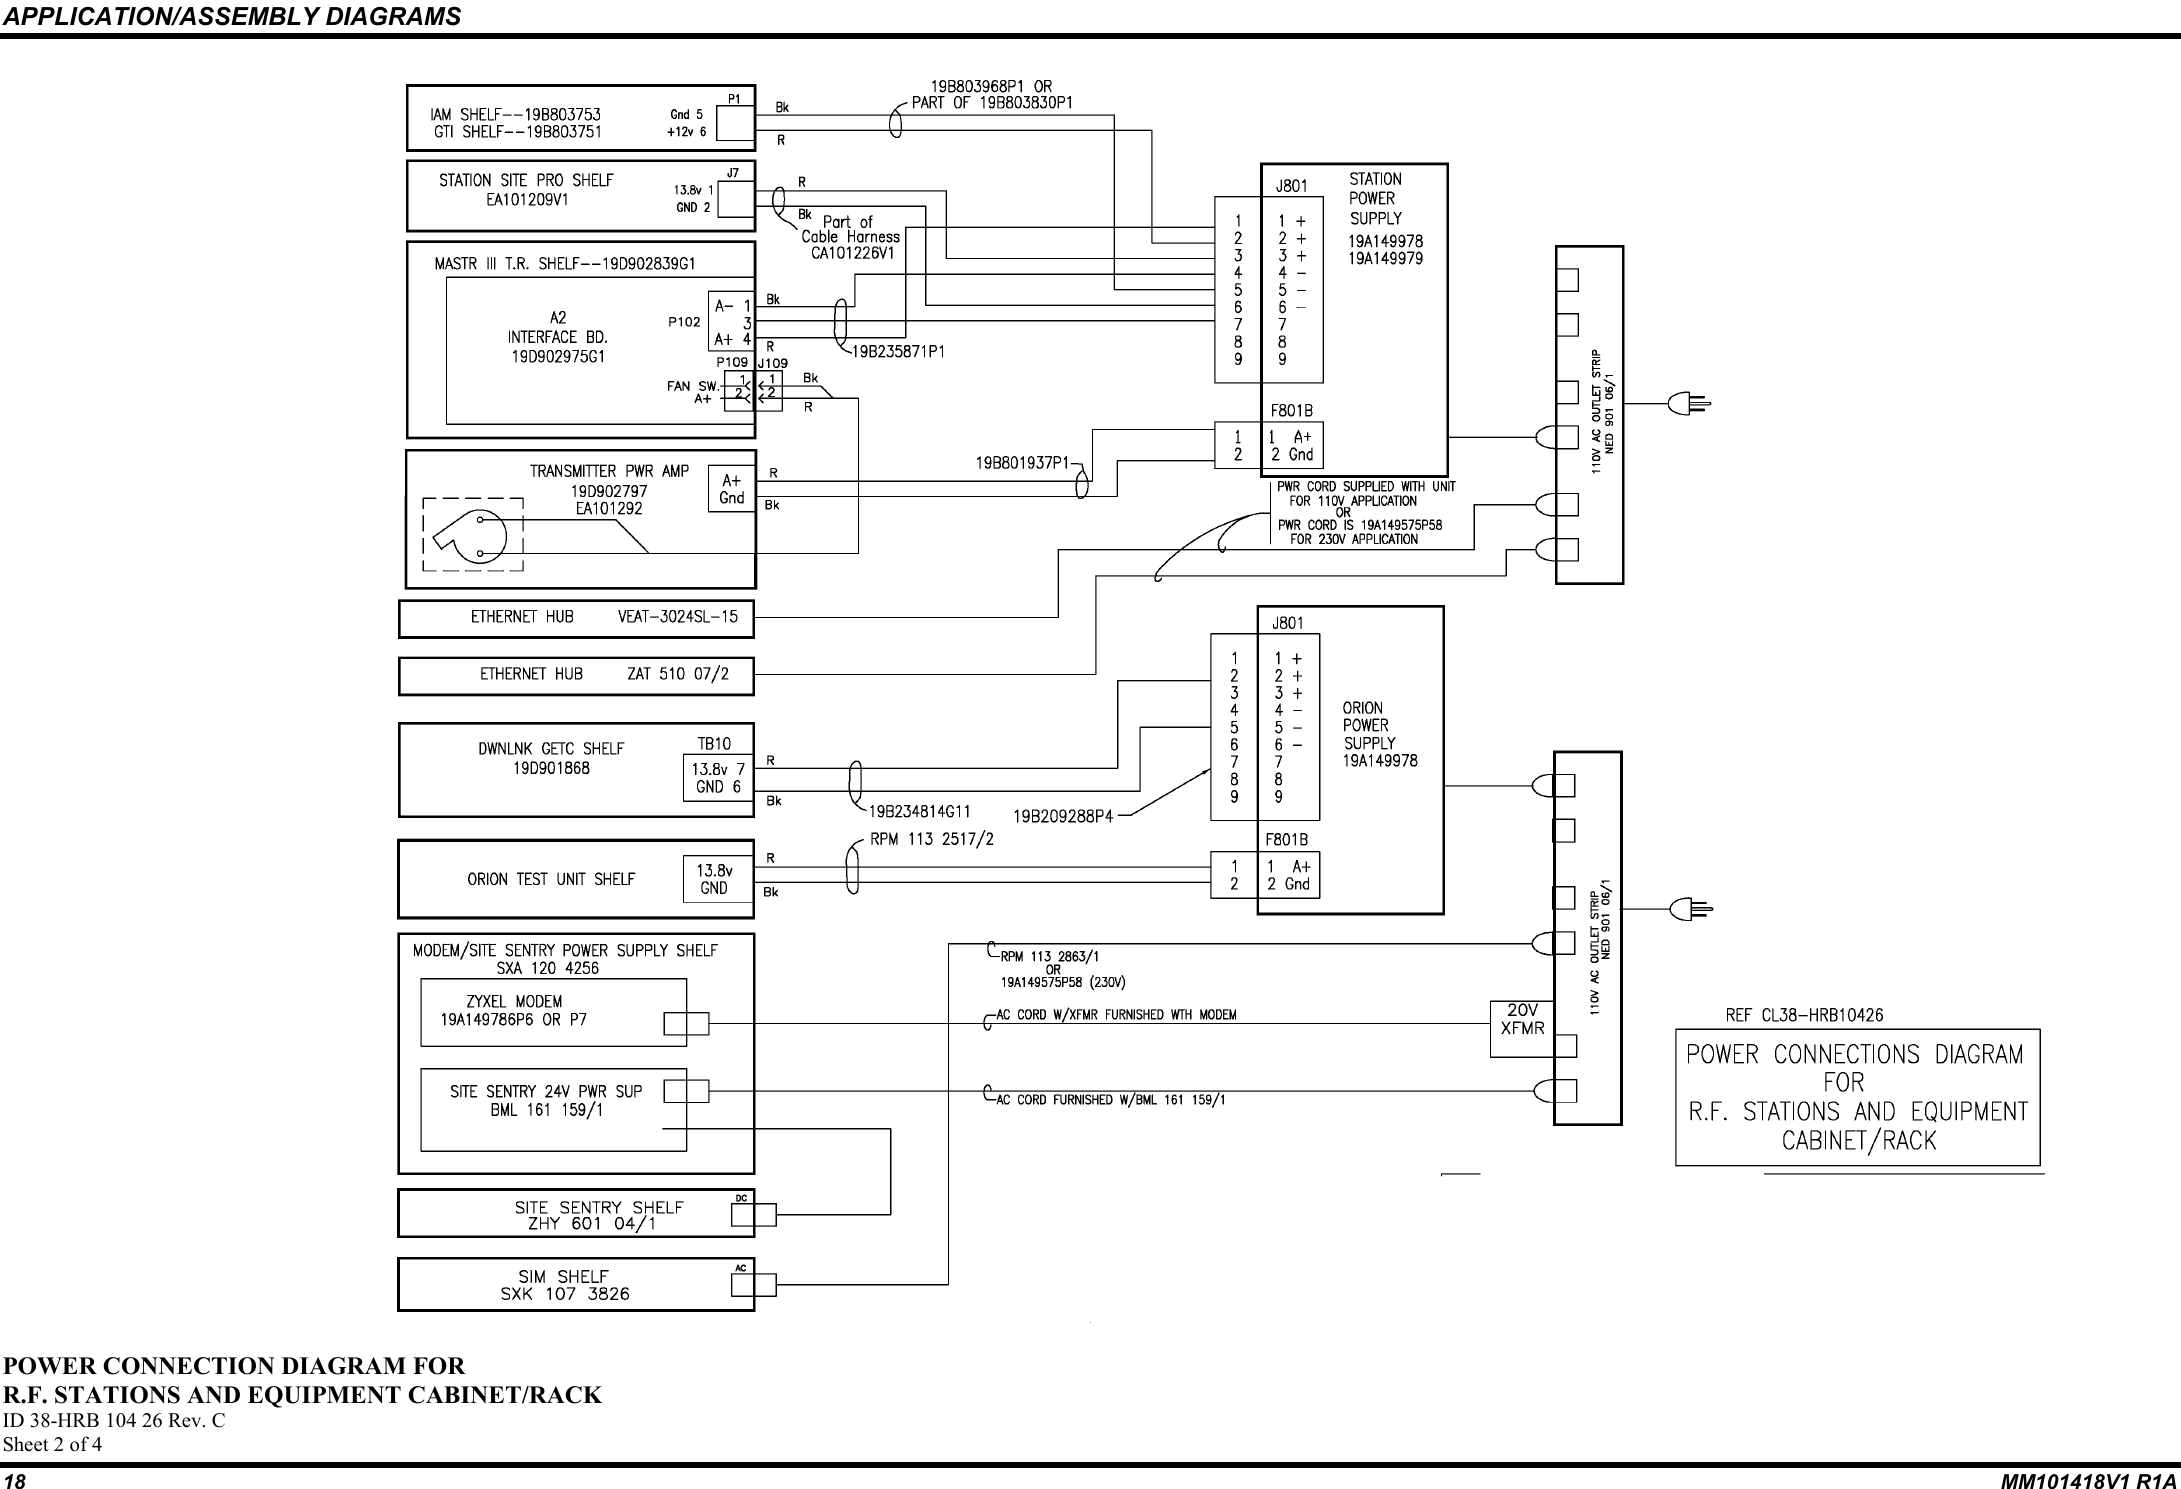 APPLICATION/ASSEMBLY DIAGRAMS18 MM101418V1 R1APOWER CONNECTION DIAGRAM FORR.F. STATIONS AND EQUIPMENT CABINET/RACKID 38-HRB 104 26 Rev. CSheet 2 of 4